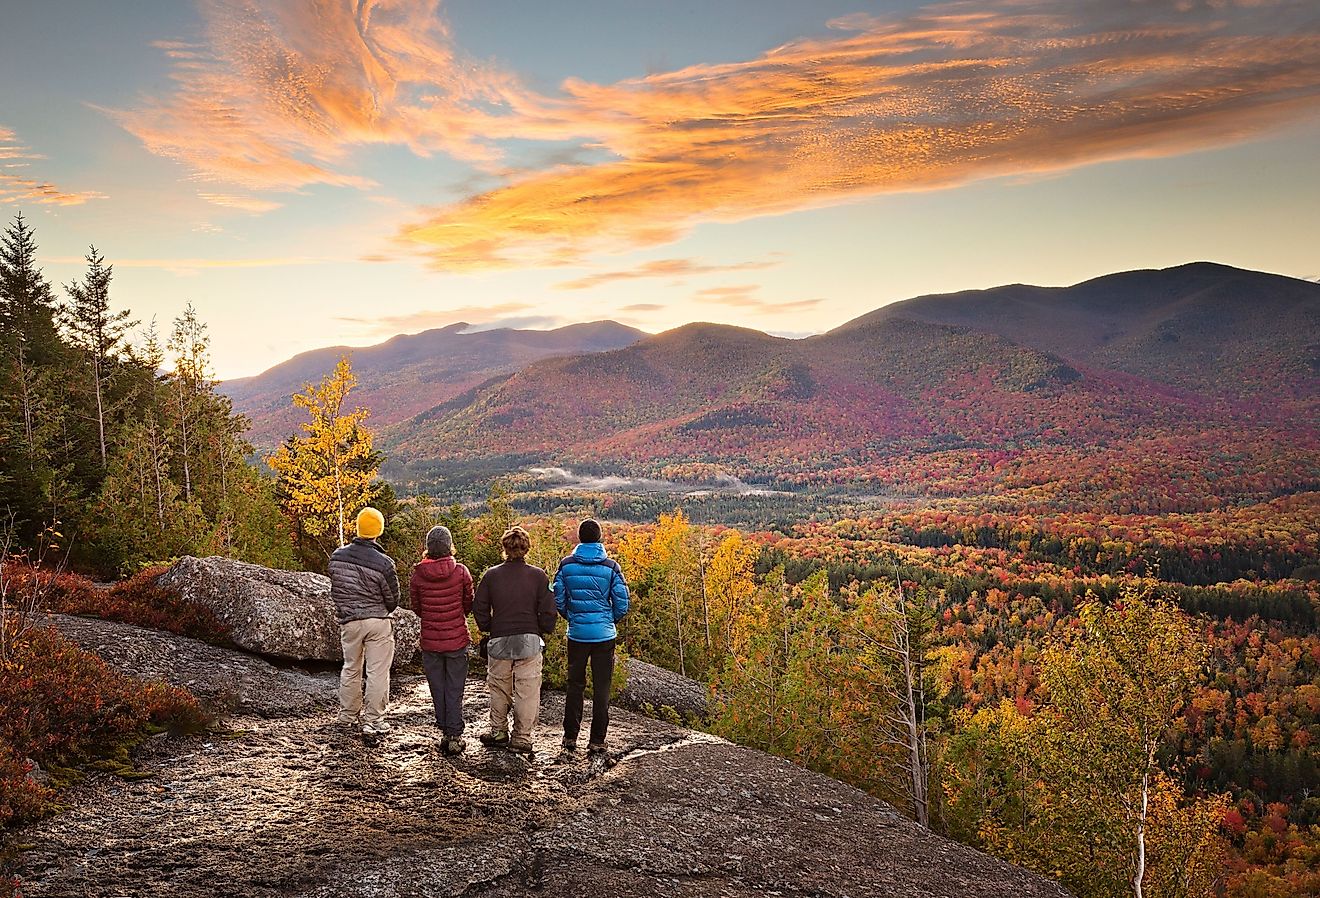 Group of hikers enjoying the view in the Adirondacks, New York.